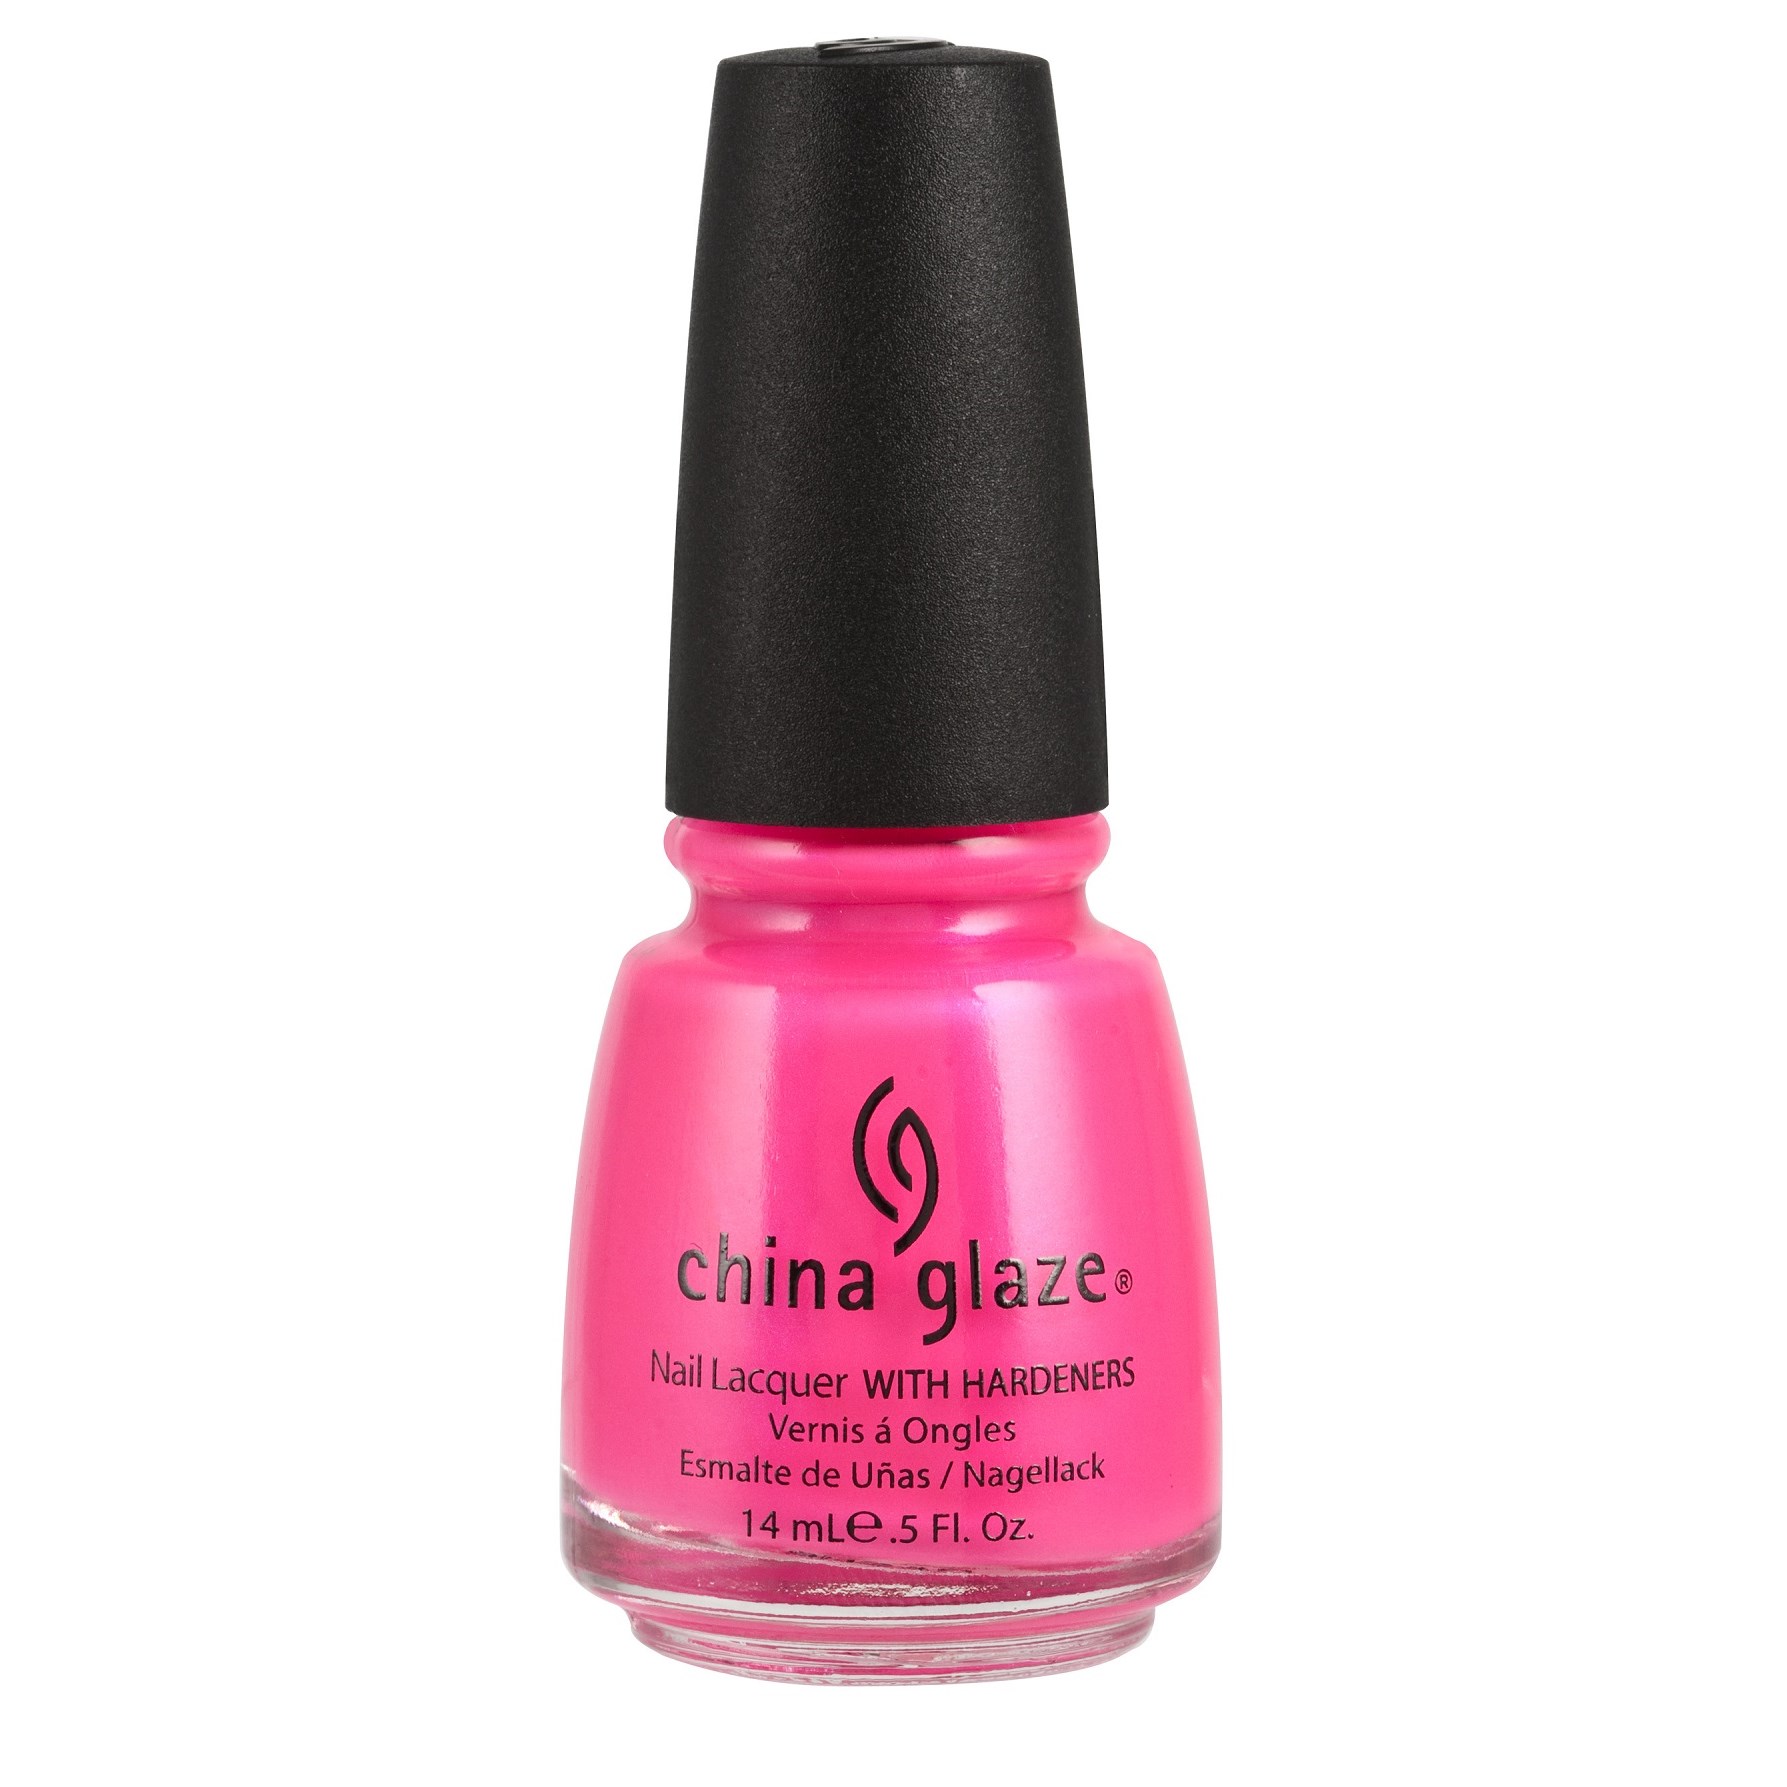 Bilde av China Glaze Nail Lacquer With Hardeners 1006 Pink Voltage